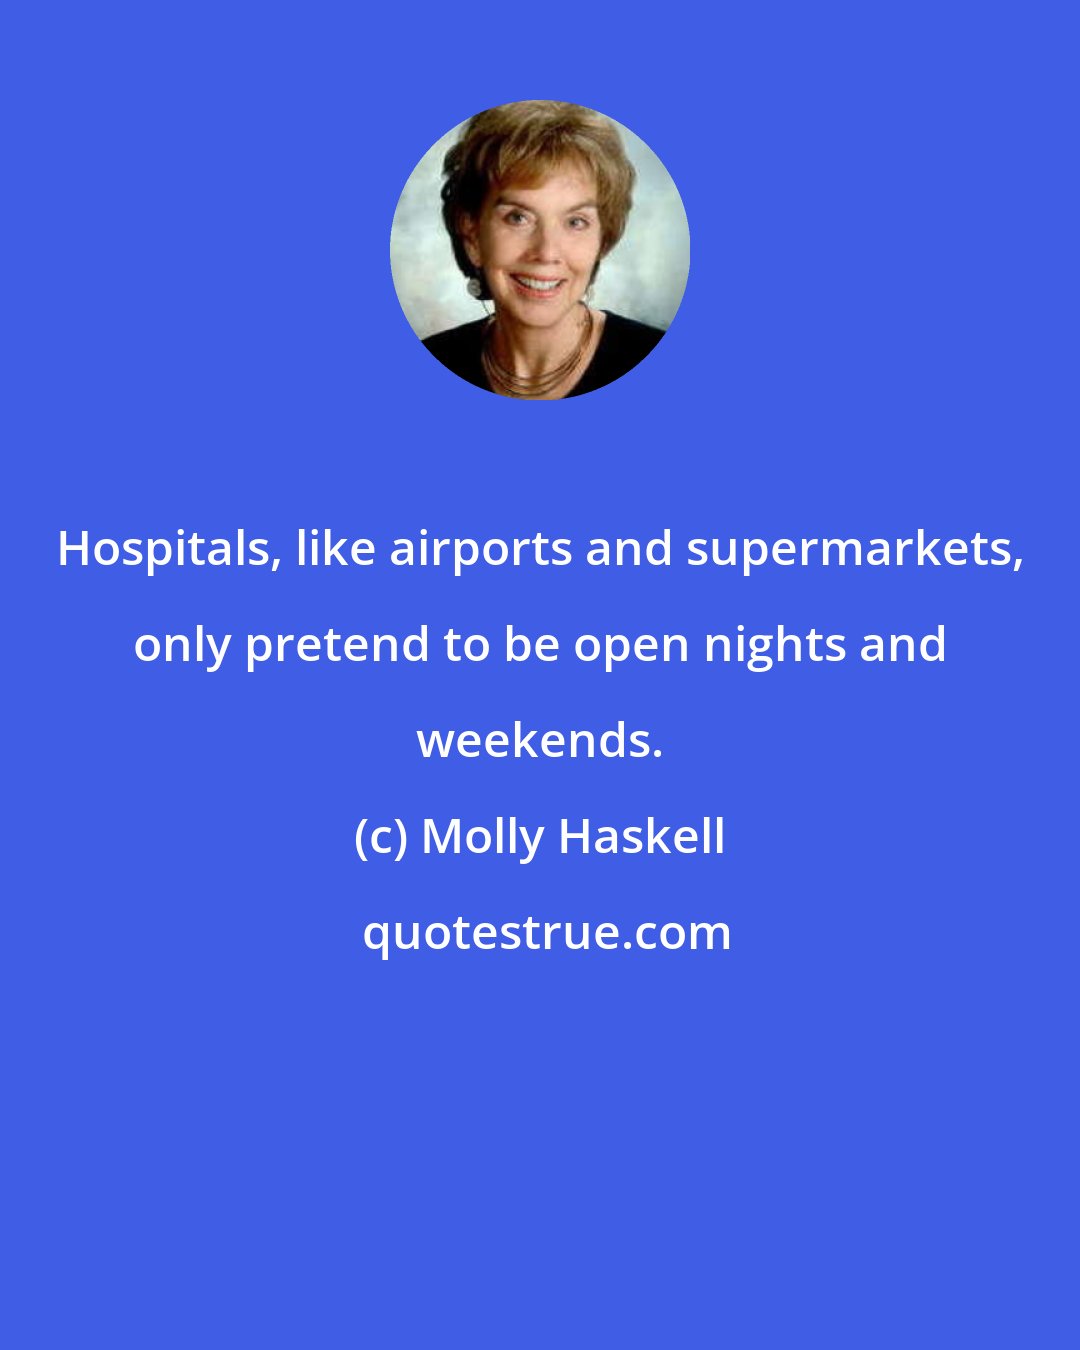 Molly Haskell: Hospitals, like airports and supermarkets, only pretend to be open nights and weekends.